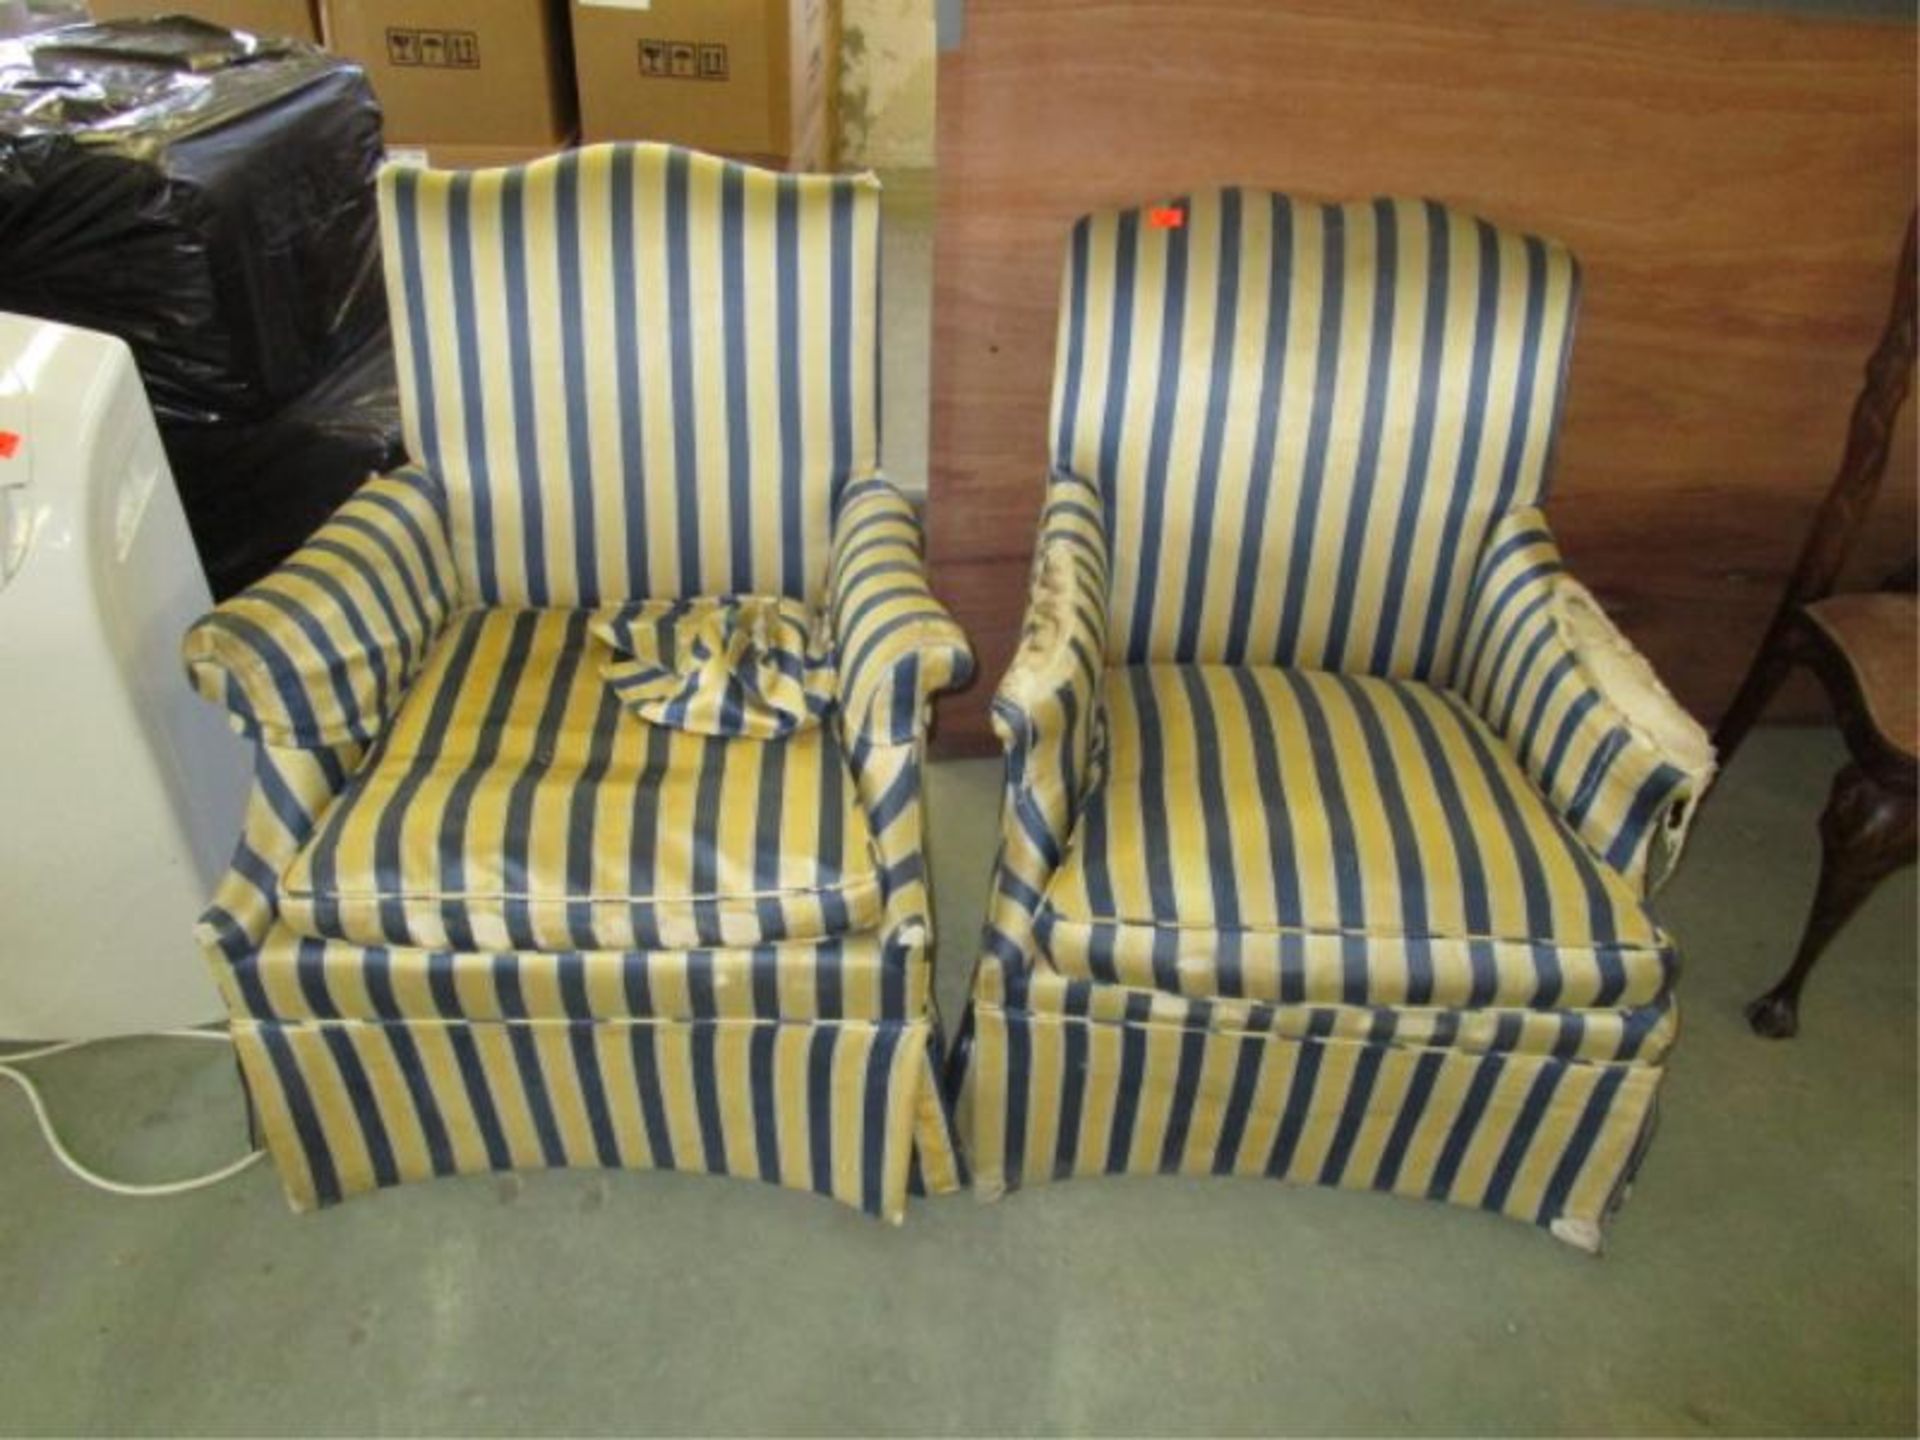 Pair of blue striped arm chairs, in need of reupholstering, poor condition